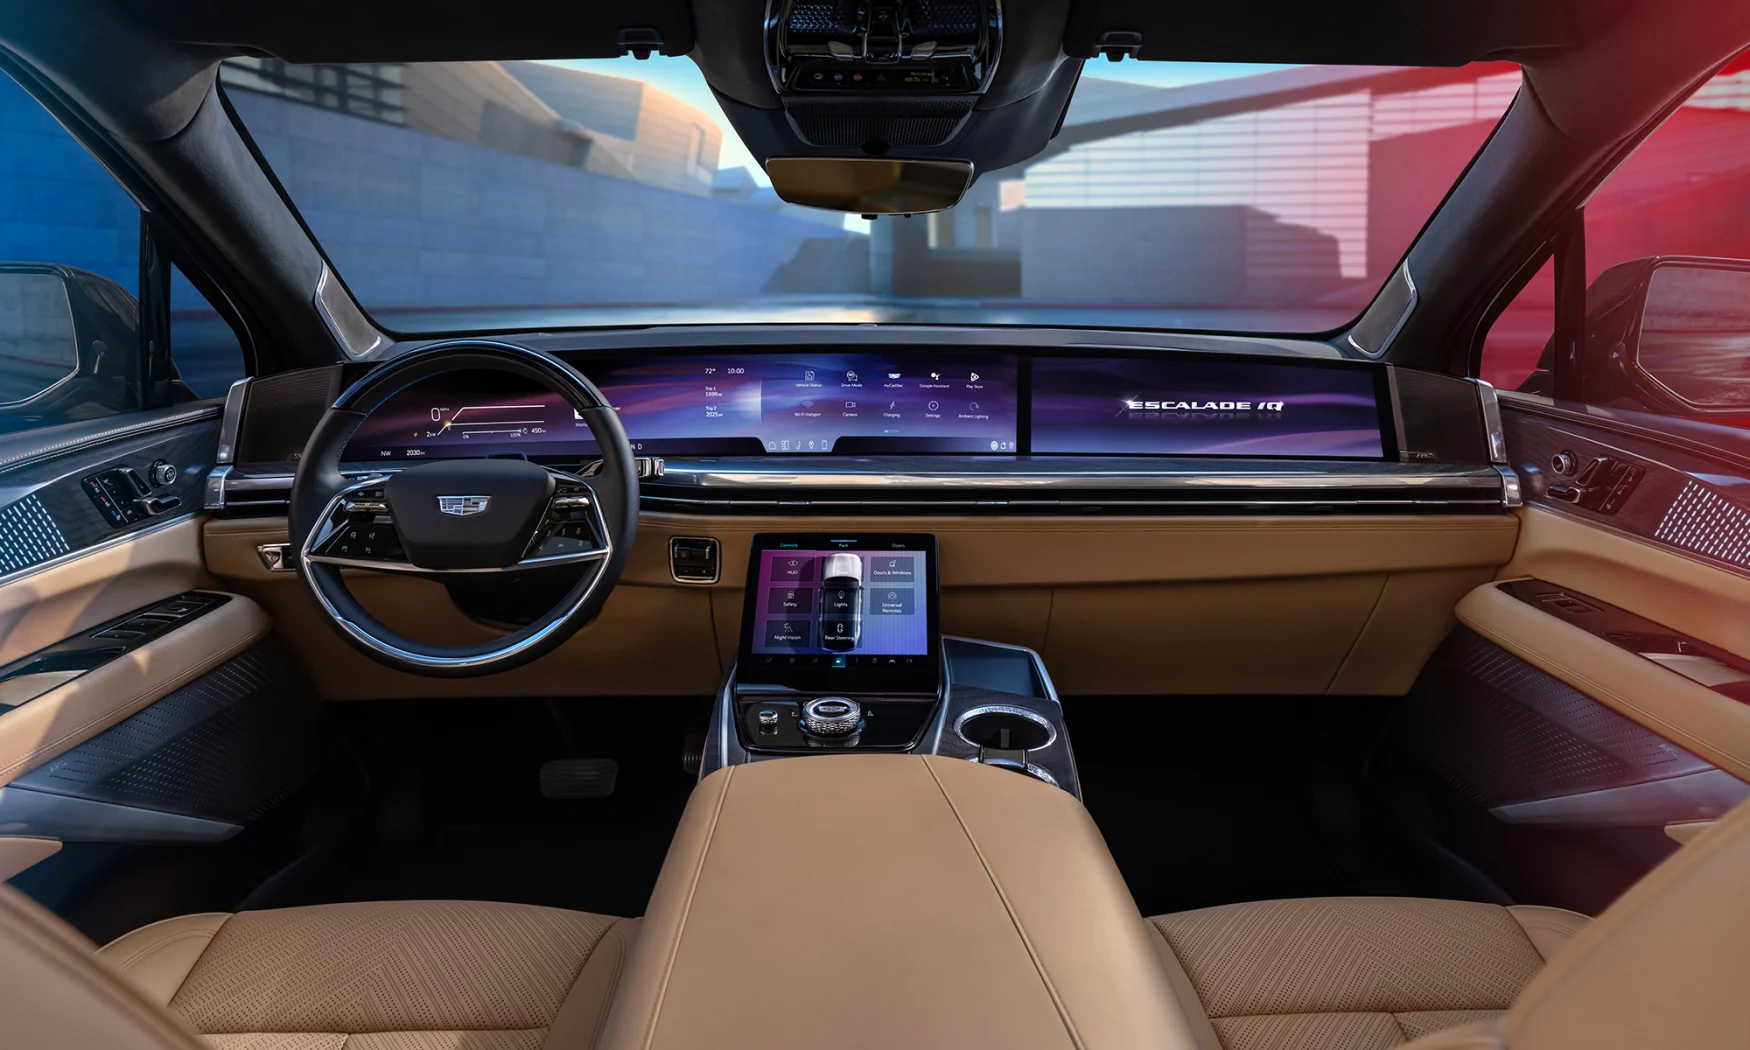 View from the center console of the 2025 Cadillac Escalade IQ. It has brown leather seats and a 55-inch dual-screen LED display on the dash. Daylight with city buildings visible through the winshield.